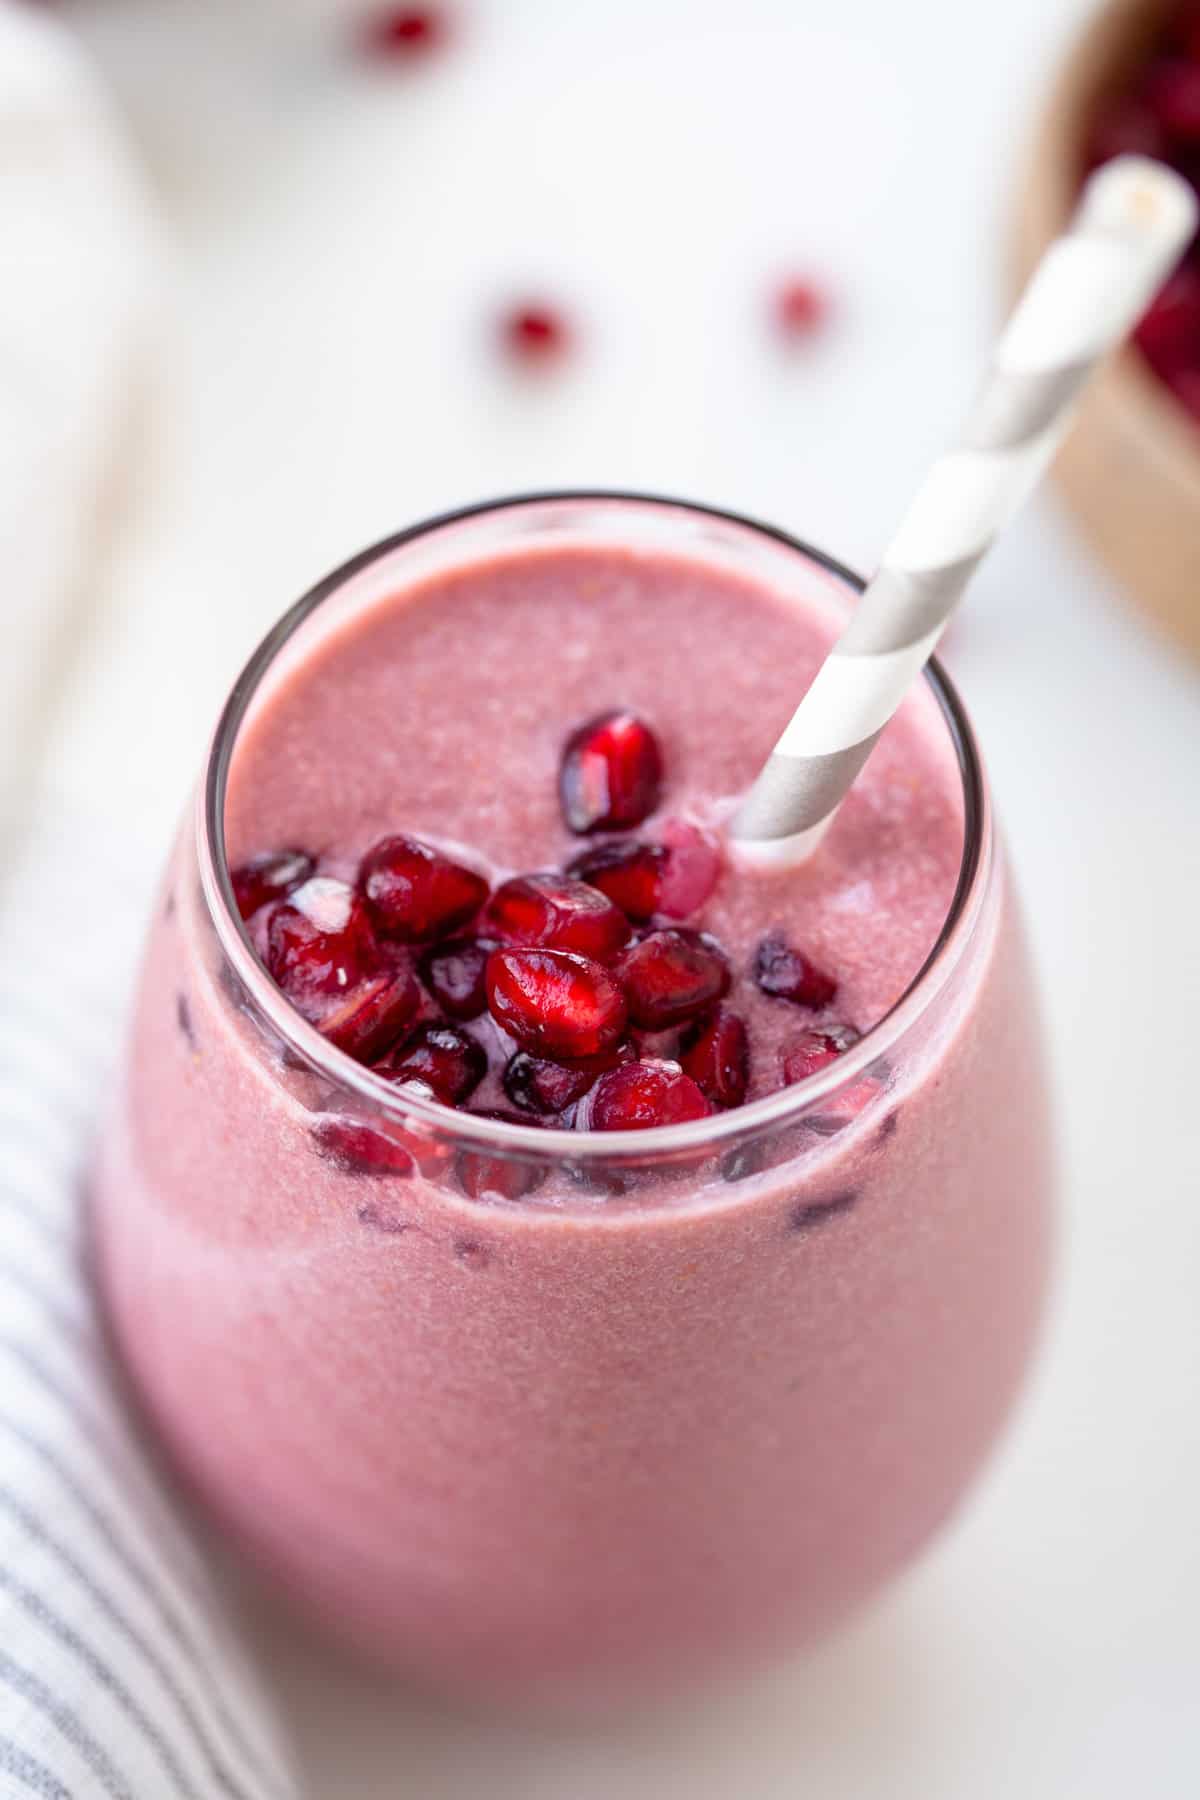 Pink smoothie in a glass with pomegranate seeds on top and a grey and white straw.